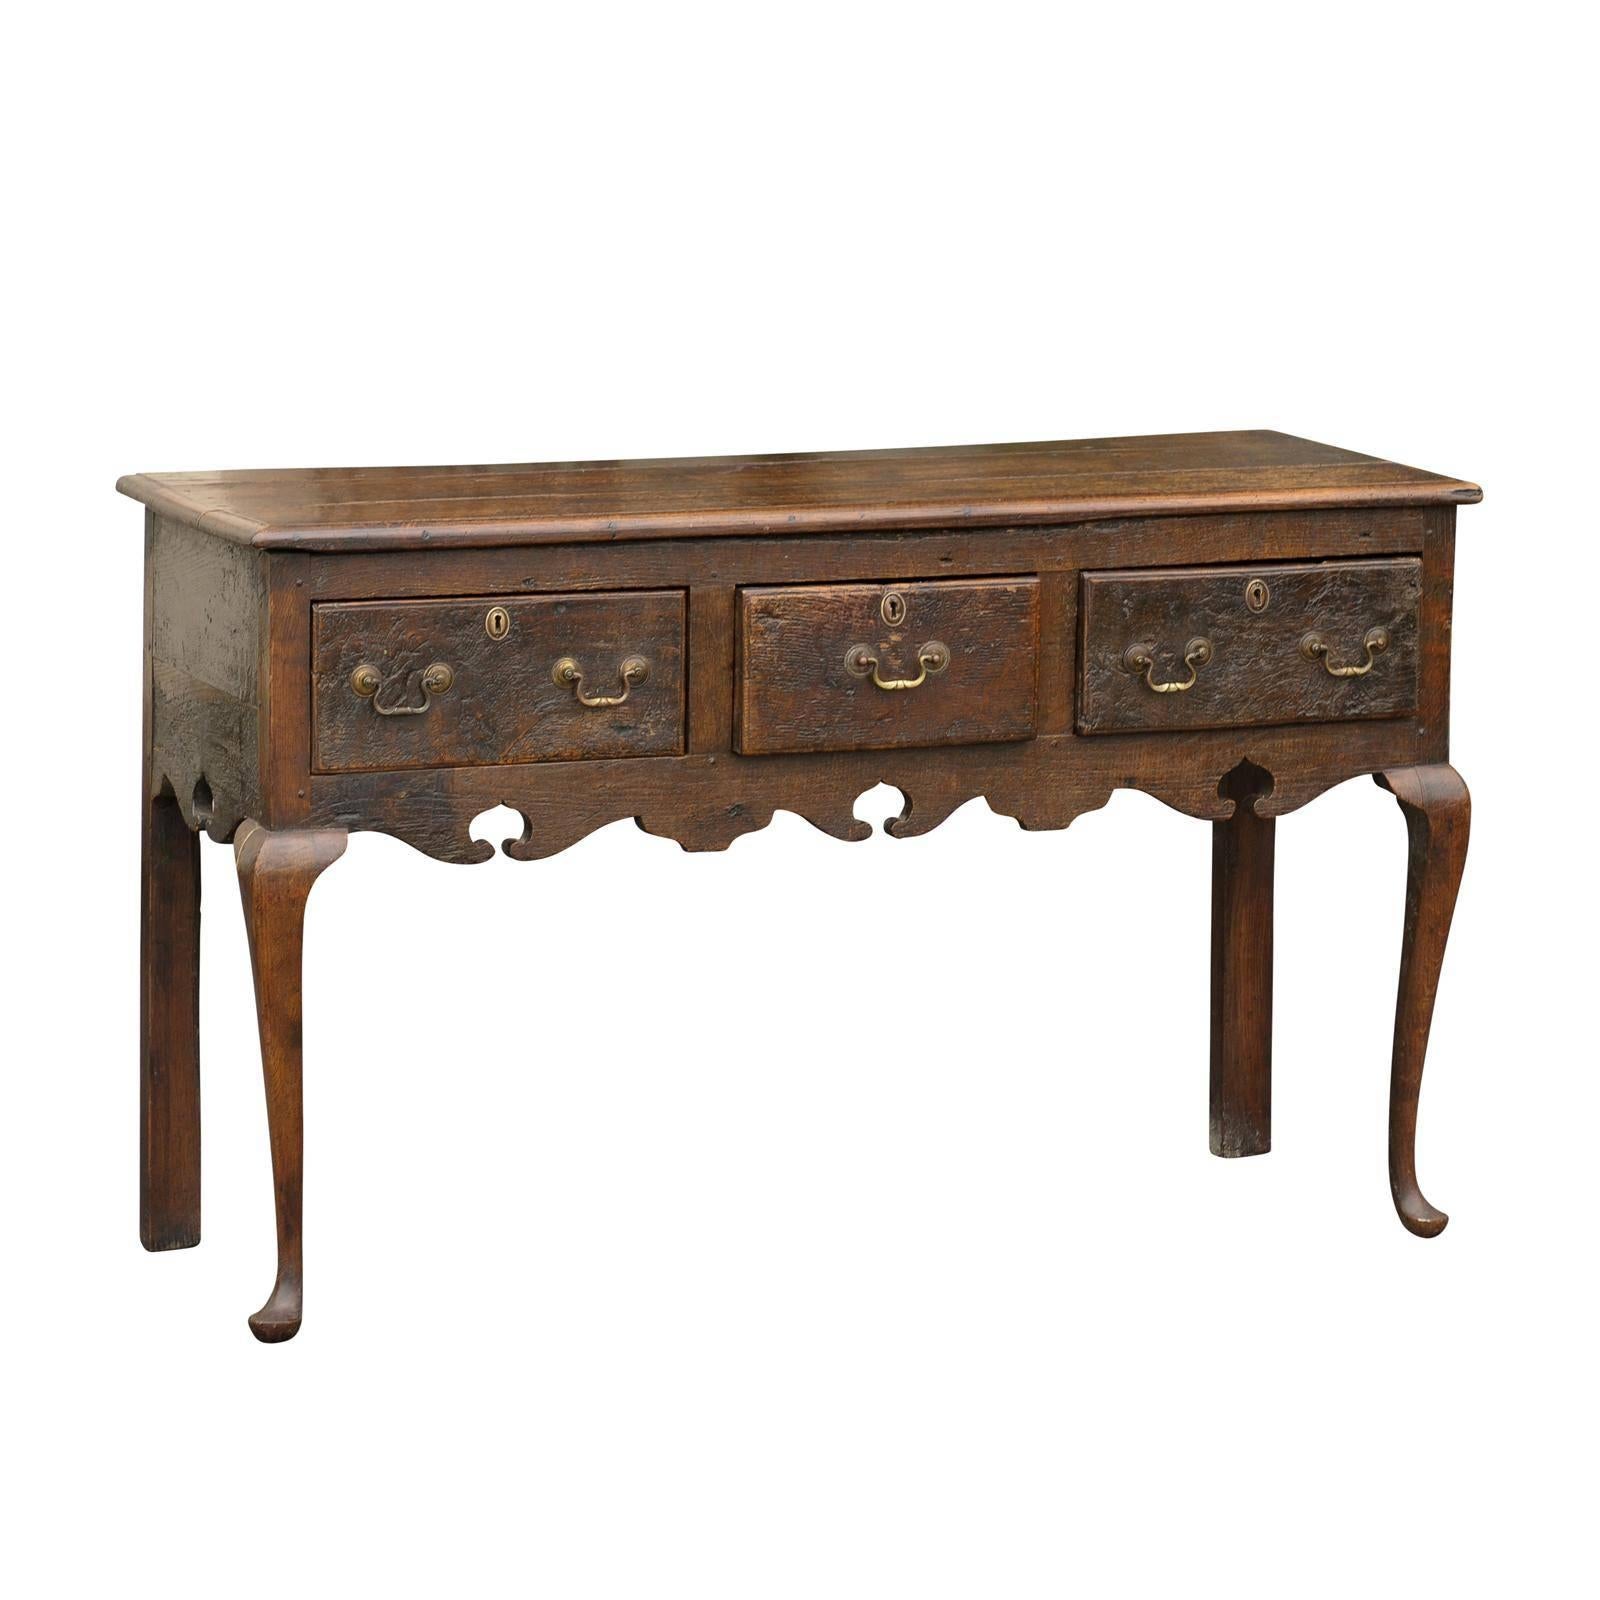 Solid Rosewood Cabriole Leg Style Sideboard with Three Drawers For Sale